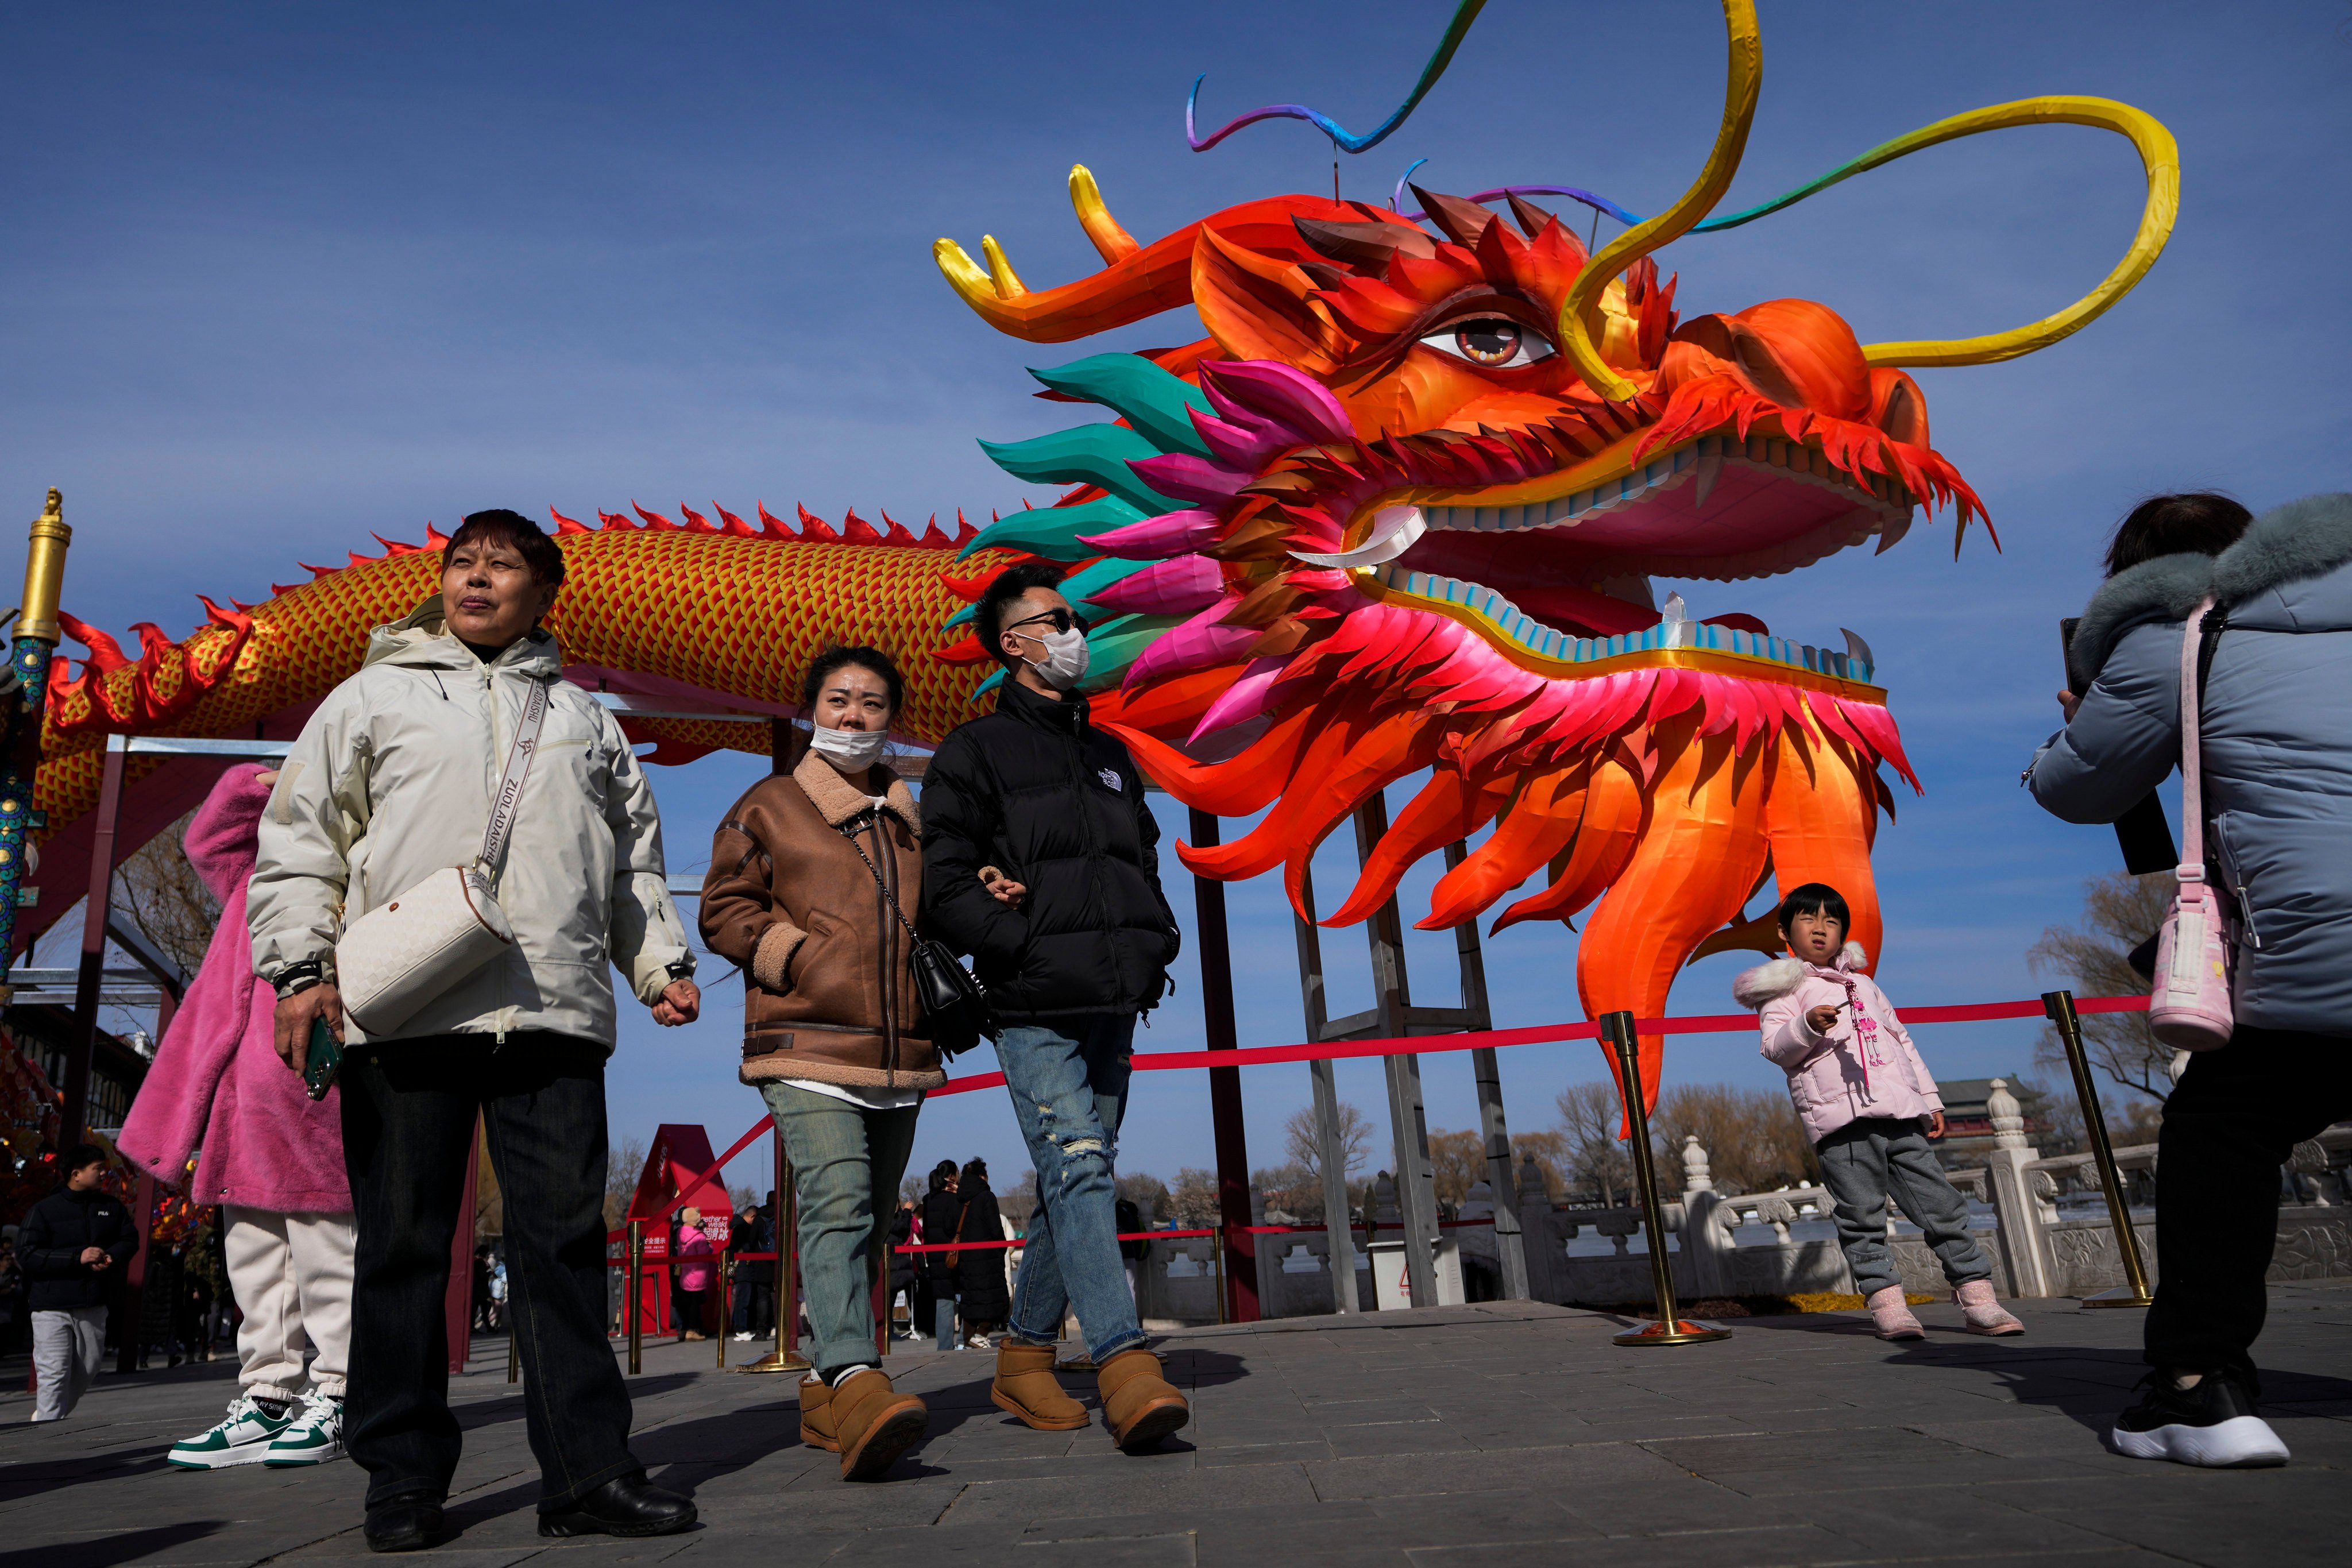 A prominent adviser to the central government has flagged choke points that Beijing must address in invigorating the Chinese economy. Photo: AP